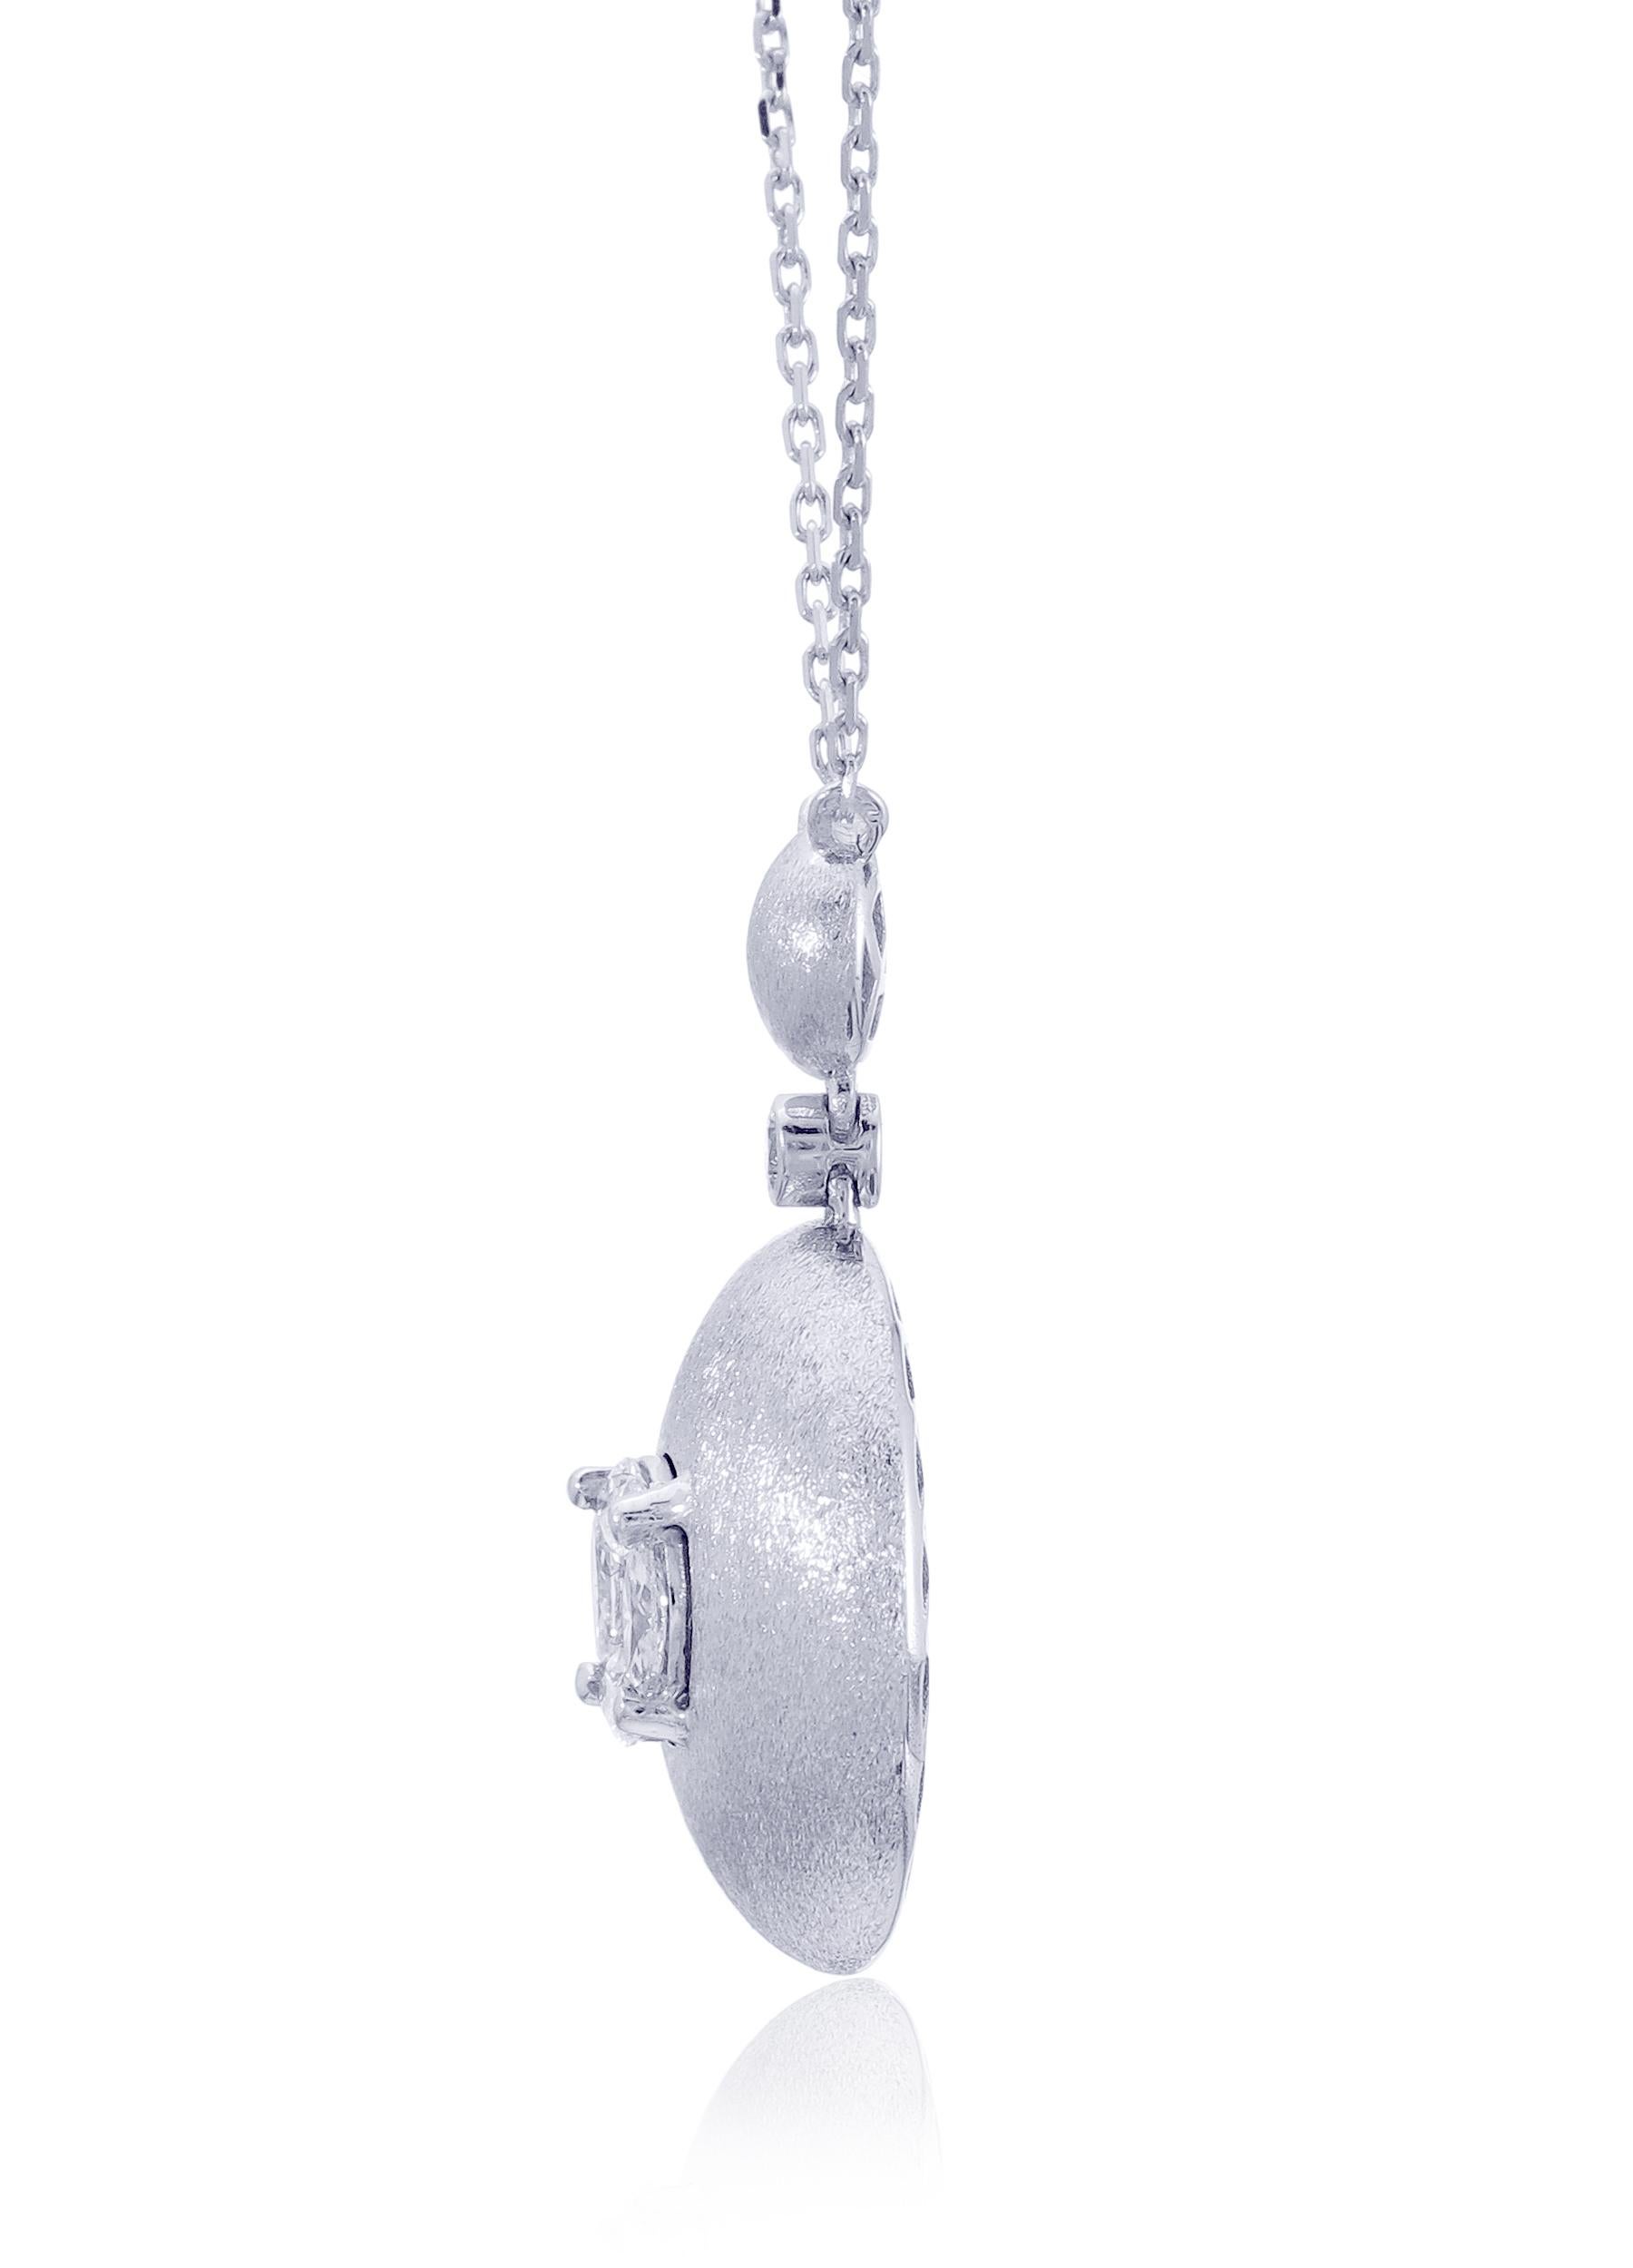 This 18K White Gold cocktail Pendant Necklace features a luscious Round shape White Diamond appx. 1.25cts Illusion. Each diamond hand-selected by our experts for its superior luster and surface quality. Combine with glamorous outfits for a